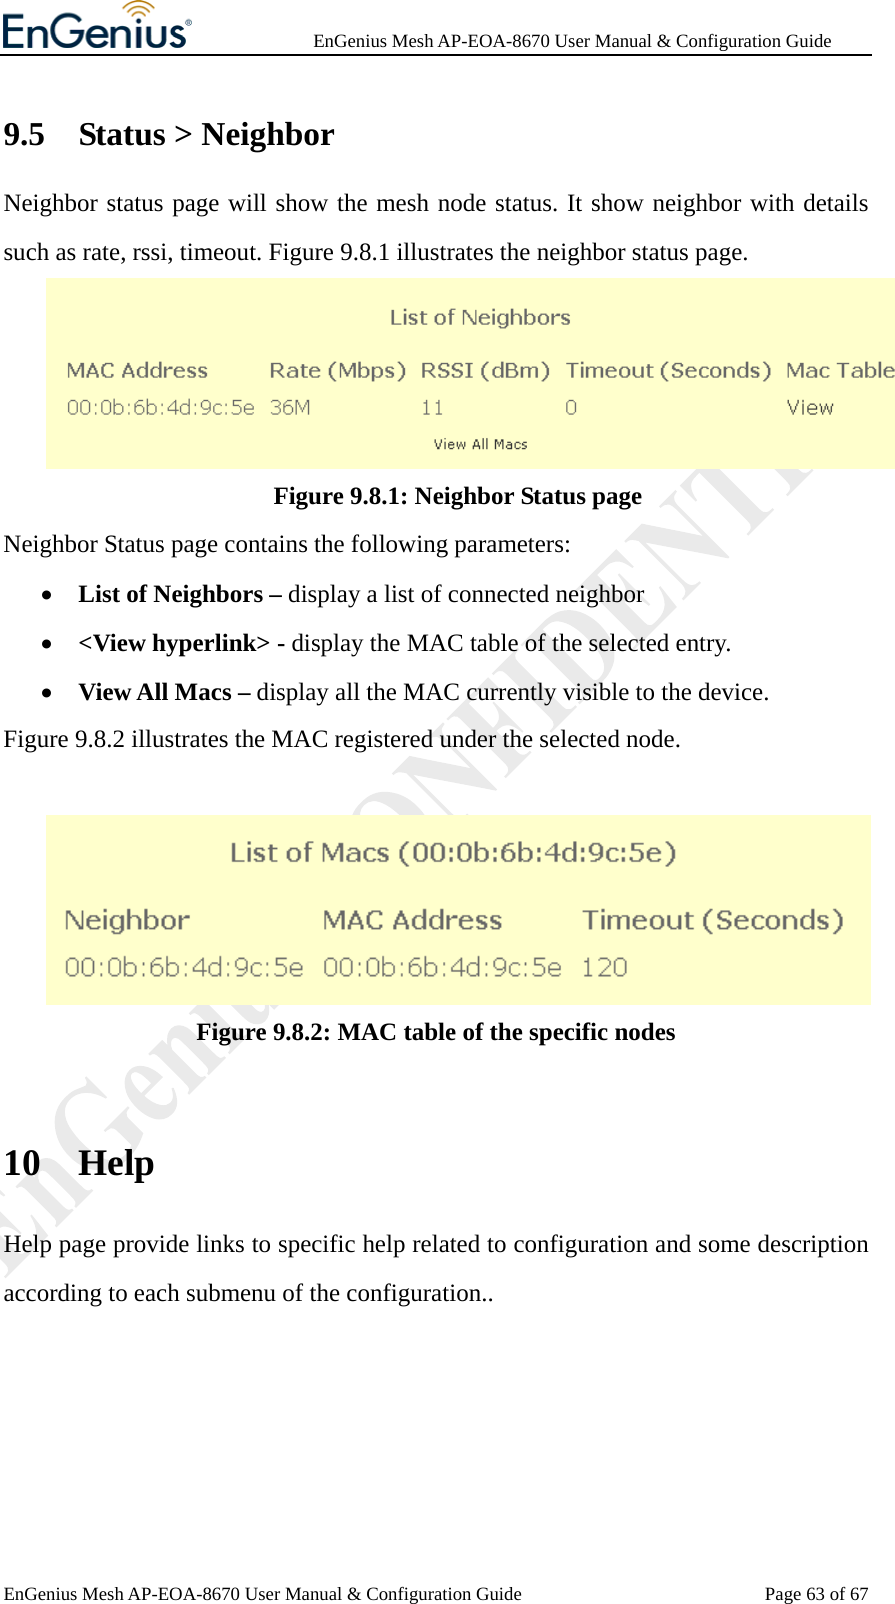              EnGenius Mesh AP-EOA-8670 User Manual &amp; Configuration Guide EnGenius Mesh AP-EOA-8670 User Manual &amp; Configuration Guide  Page 63 of 679.5 Status &gt; Neighbor Neighbor status page will show the mesh node status. It show neighbor with details such as rate, rssi, timeout. Figure 9.8.1 illustrates the neighbor status page.  Figure 9.8.1: Neighbor Status page Neighbor Status page contains the following parameters: • List of Neighbors – display a list of connected neighbor • &lt;View hyperlink&gt; - display the MAC table of the selected entry. • View All Macs – display all the MAC currently visible to the device. Figure 9.8.2 illustrates the MAC registered under the selected node.   Figure 9.8.2: MAC table of the specific nodes  10 Help Help page provide links to specific help related to configuration and some description according to each submenu of the configuration..    